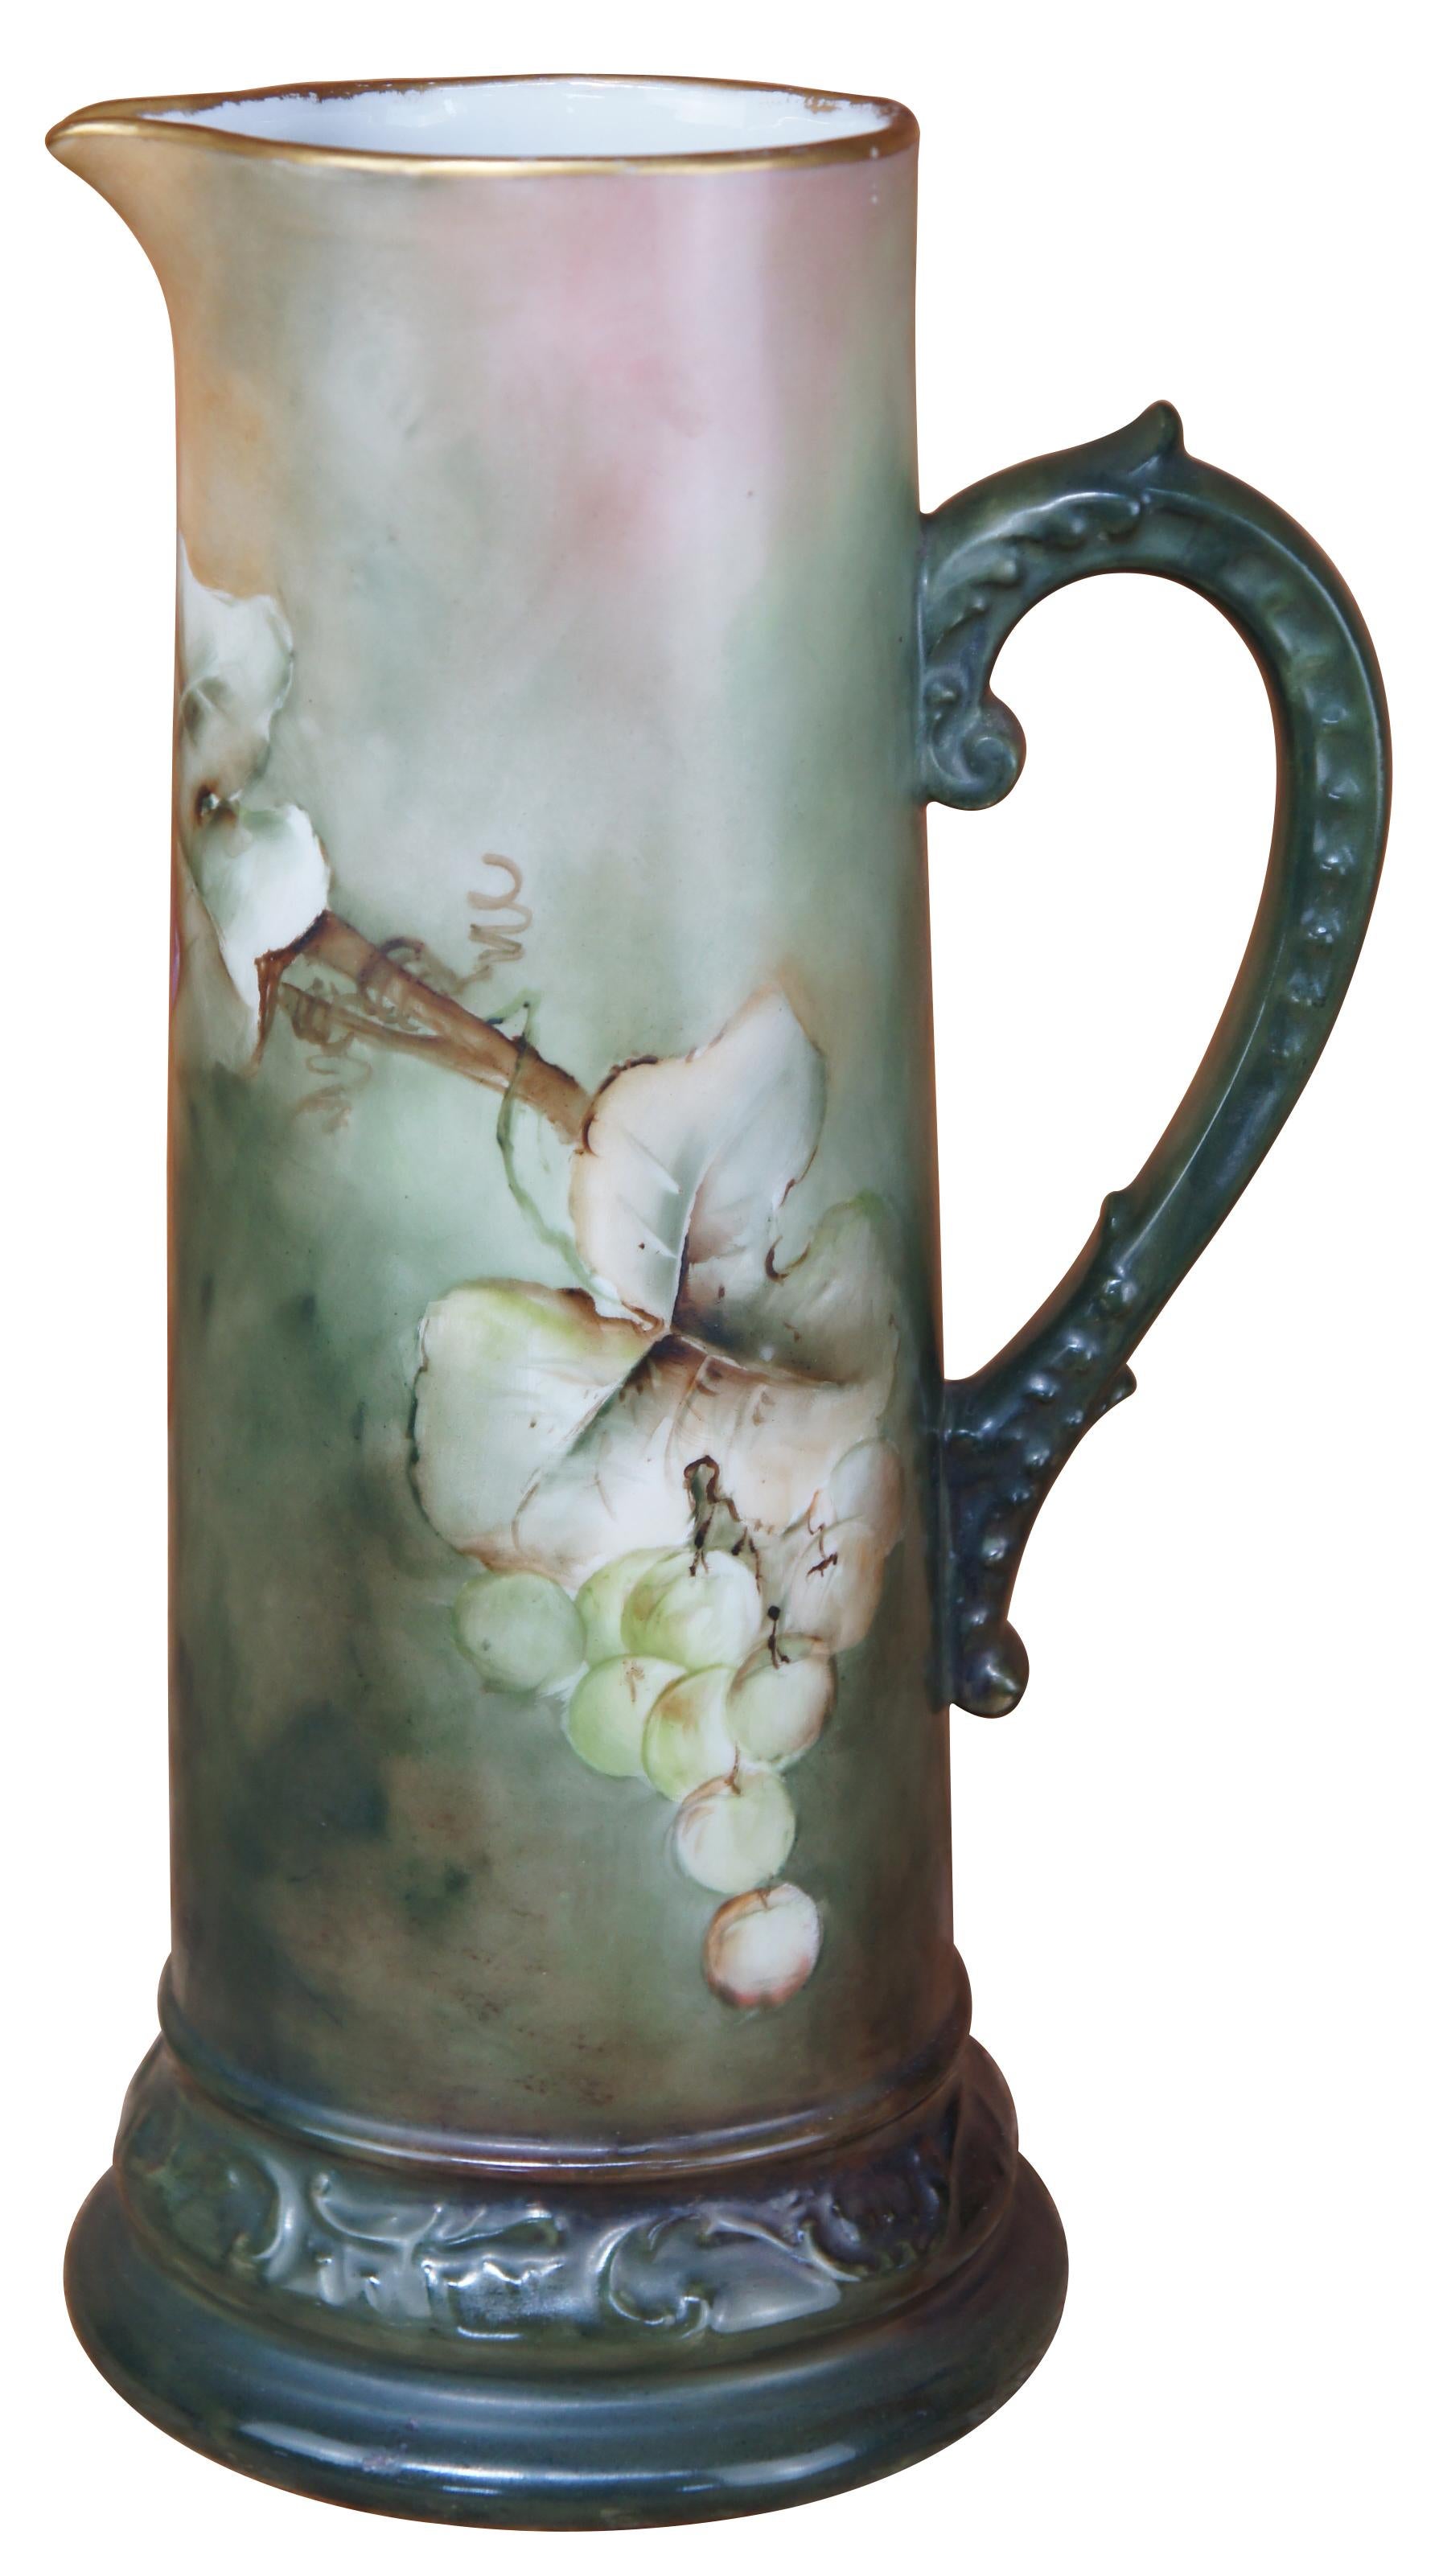 This antique tankard was made around the turn of the century in France. Features beautiful hand painted grapes over a earthy green color. The upper lip has gold trim. An exquisite piece of craftsmanship. Don't miss the opportunity to add this beauty